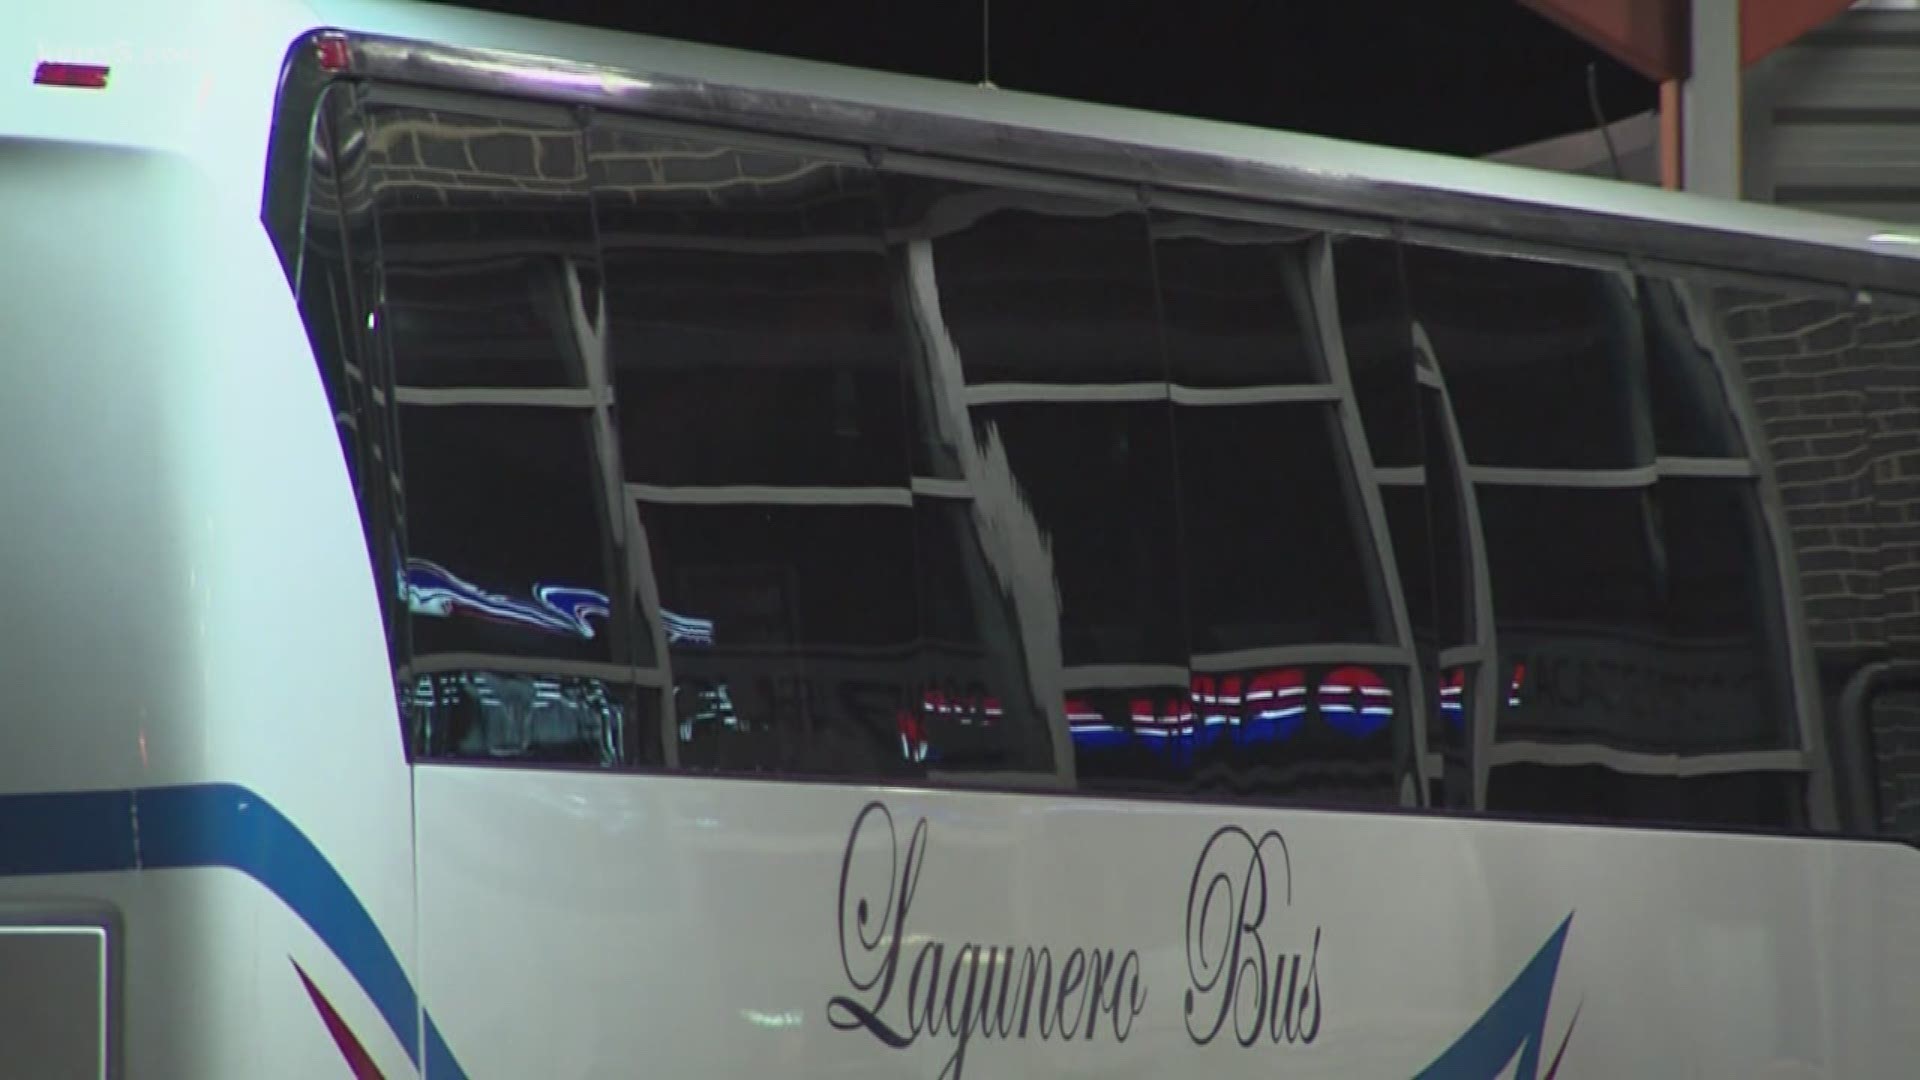 A 60-year-old woman was shot in the head while on a charter bus traveling to Dallas.